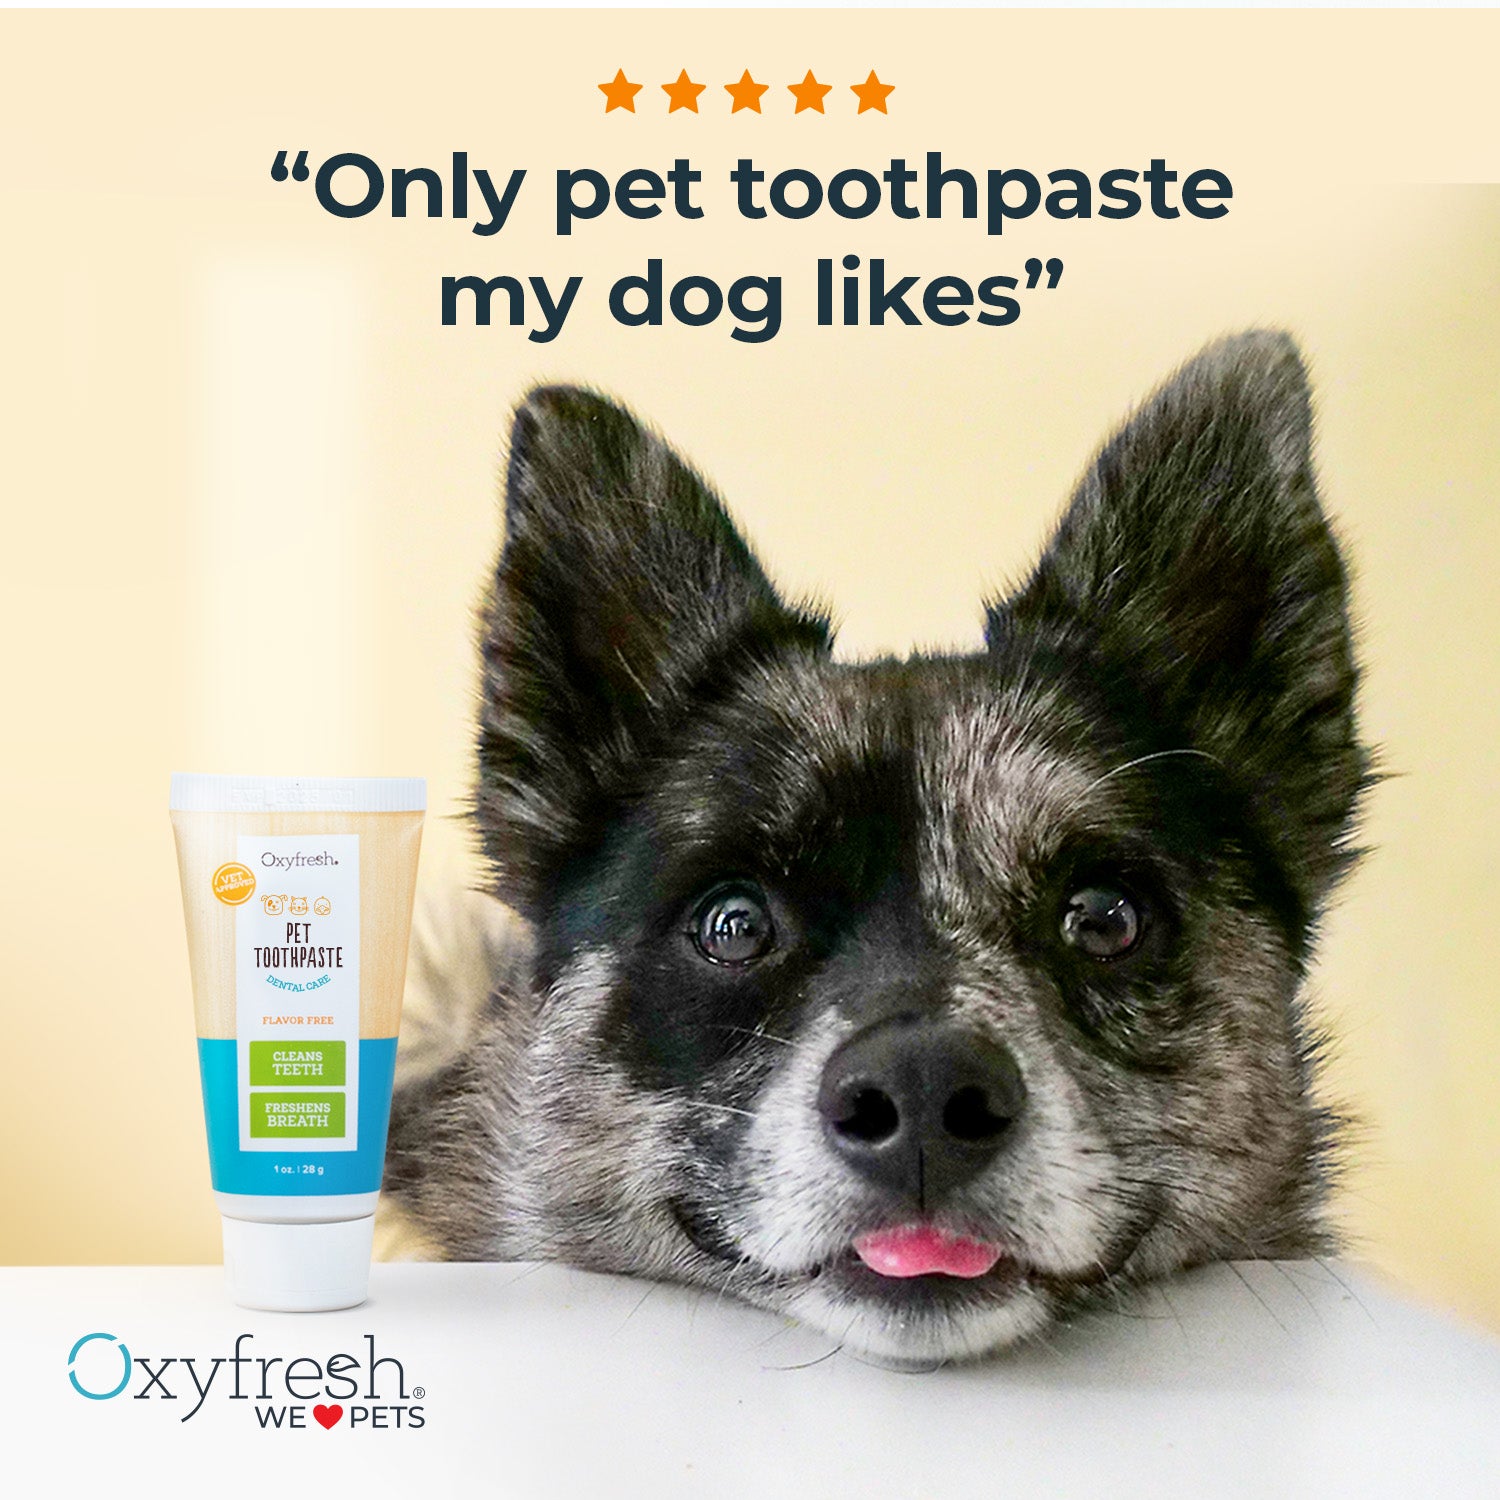 oxyfresh pet toothpaste and pup with her tongue stuck out with a 5-star review above that says "only pet toothpaste my dog likes" 